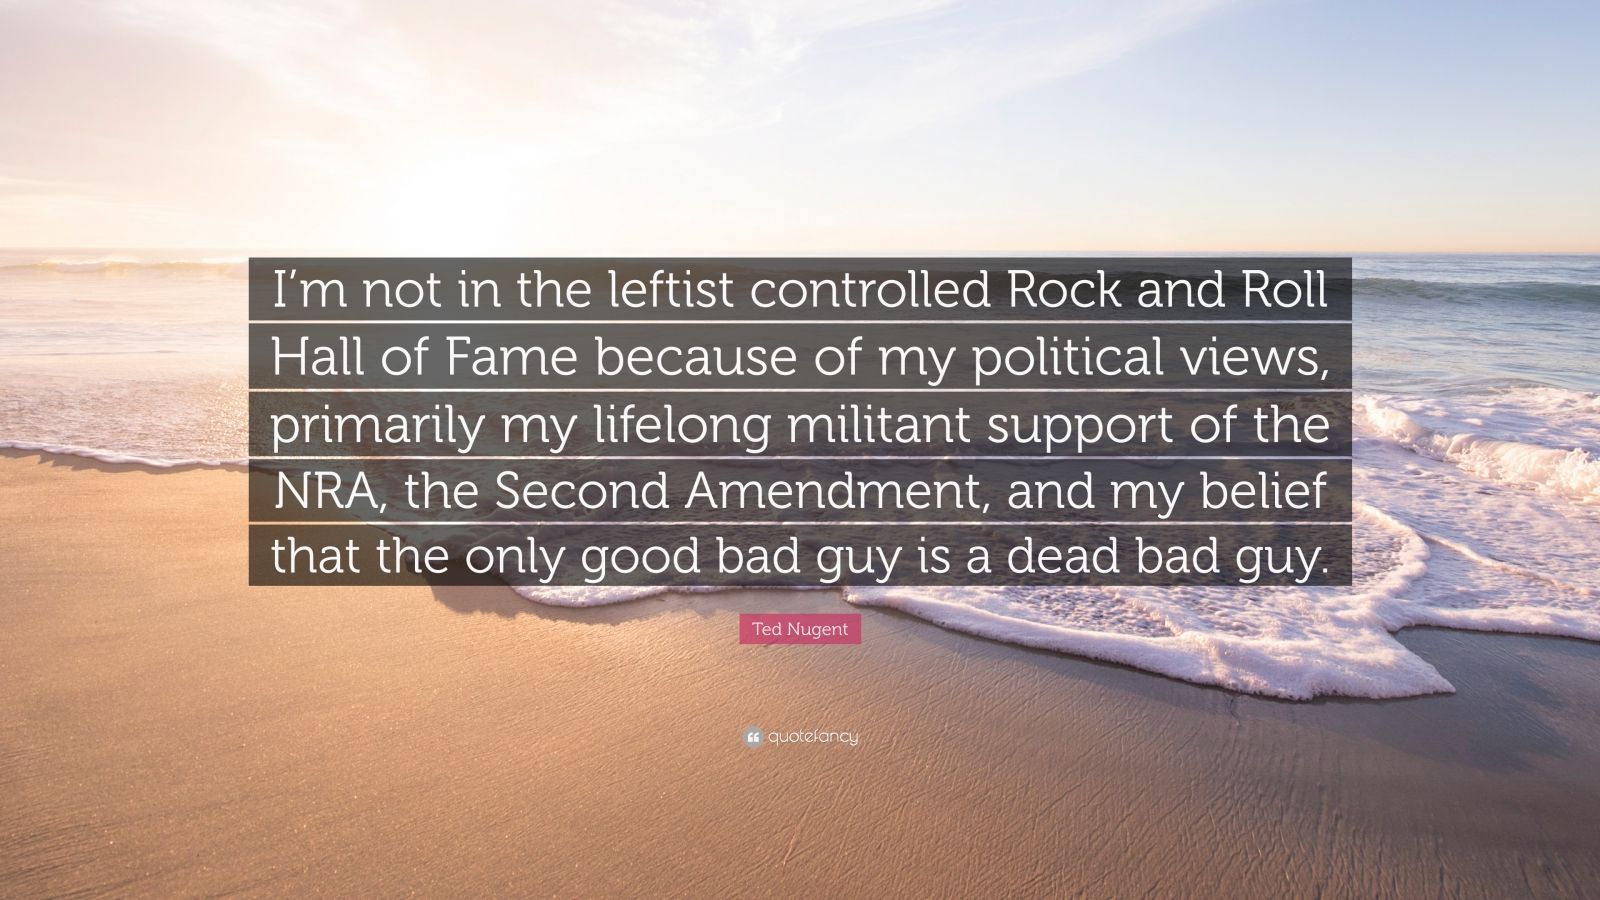 Ted Nugent Quote: “I’m not in the leftist controlled Rock and Roll Hall